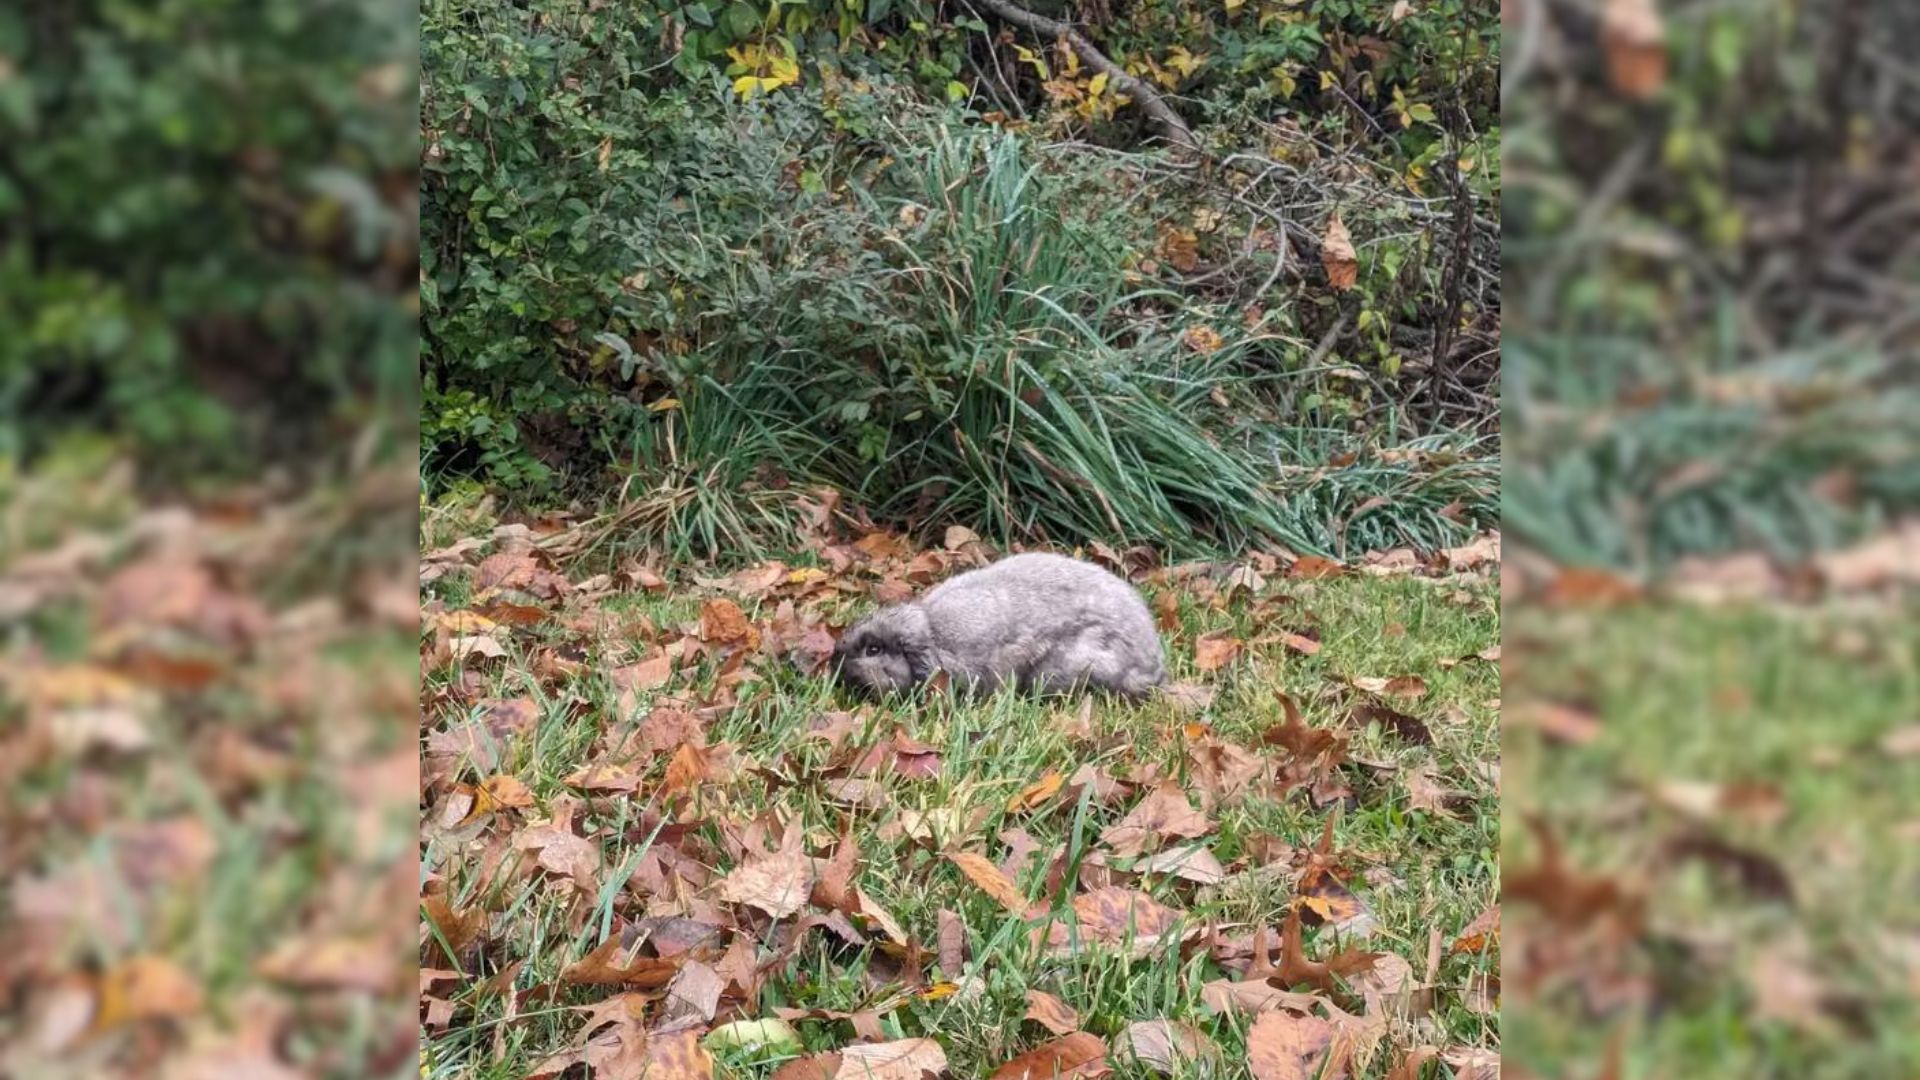 Woman Walking In The Park Spots A Mysterious Gray Creature On The Grass